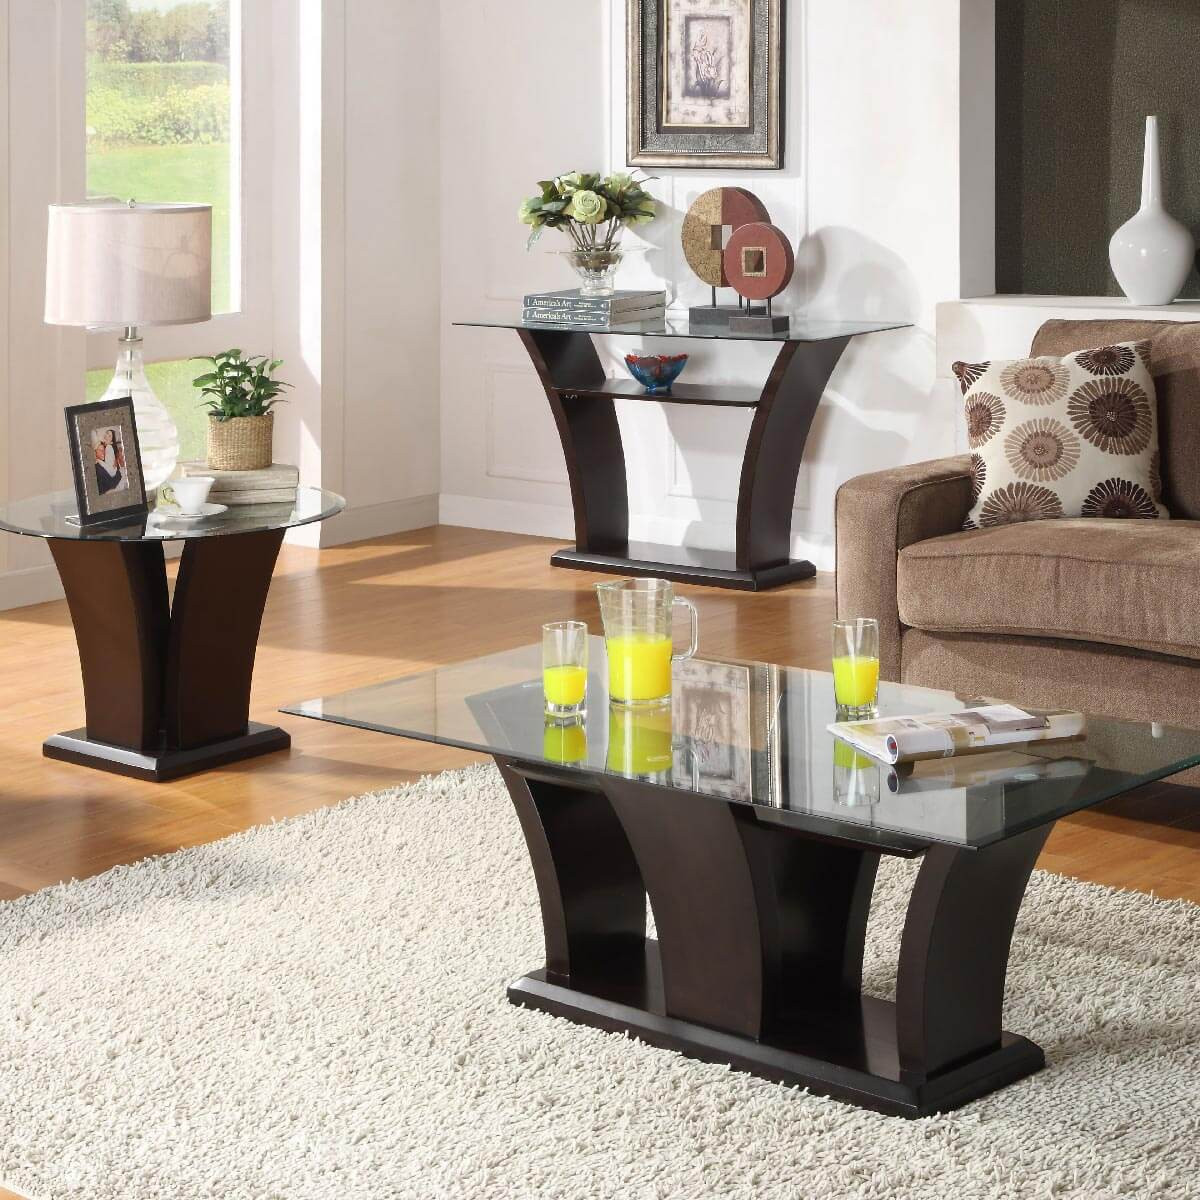 Living Room Console Tables
 Glass Sofa Table For A Great Living Room Decor Ideas